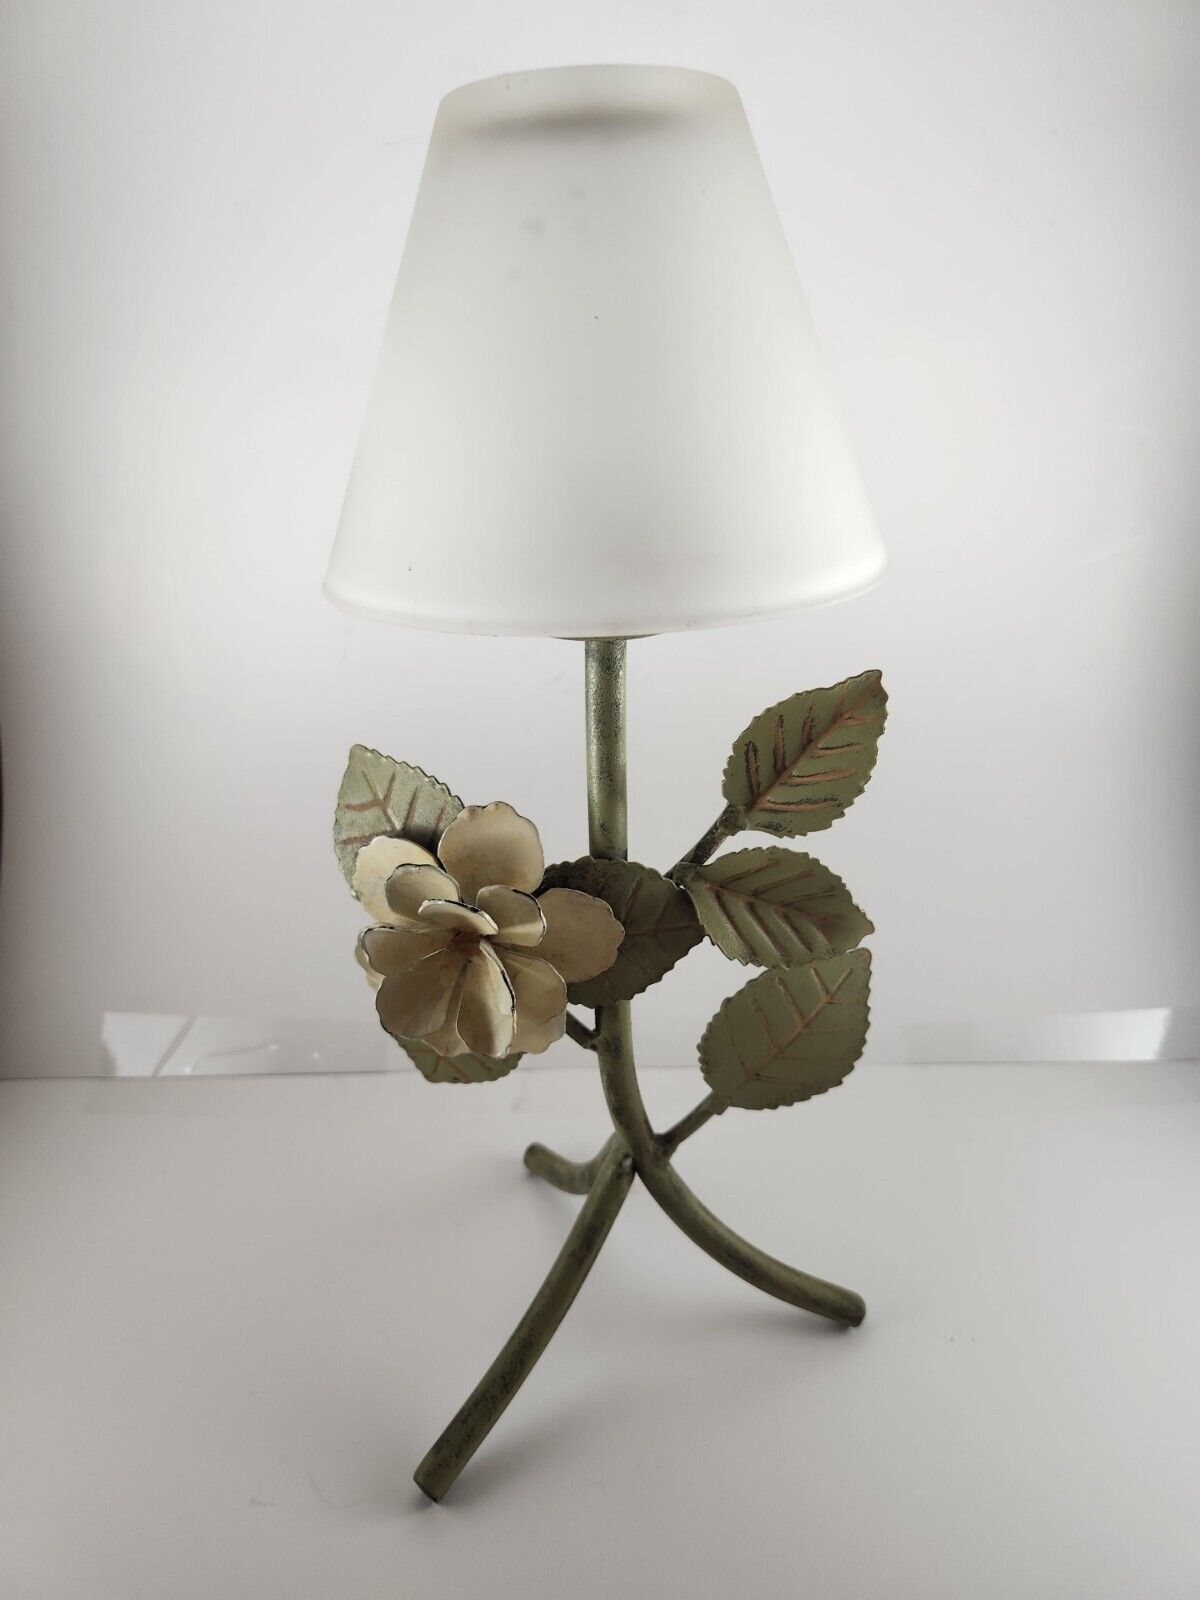 Vintage Metal Floral Leaves Tealight Lamp w/Frosted Glass Shade Cream/Green 13